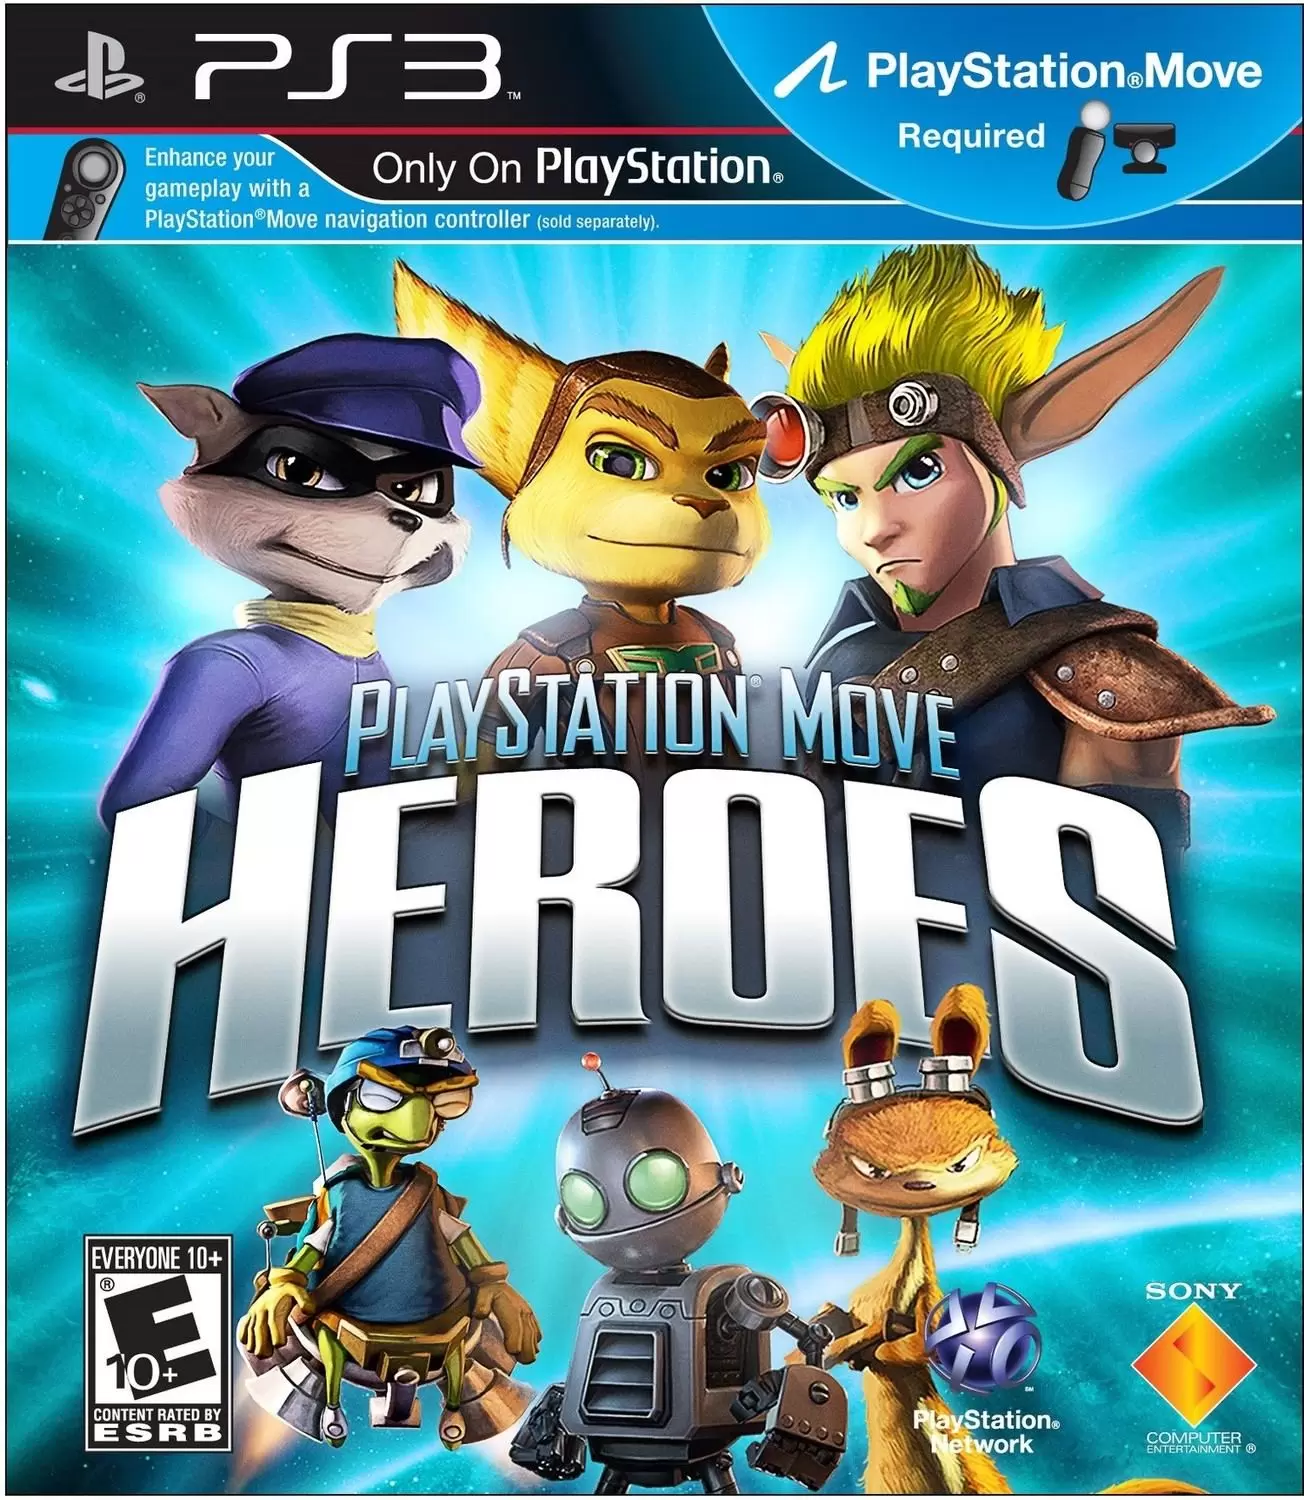 PS3 Games - PlayStation Move Heroes